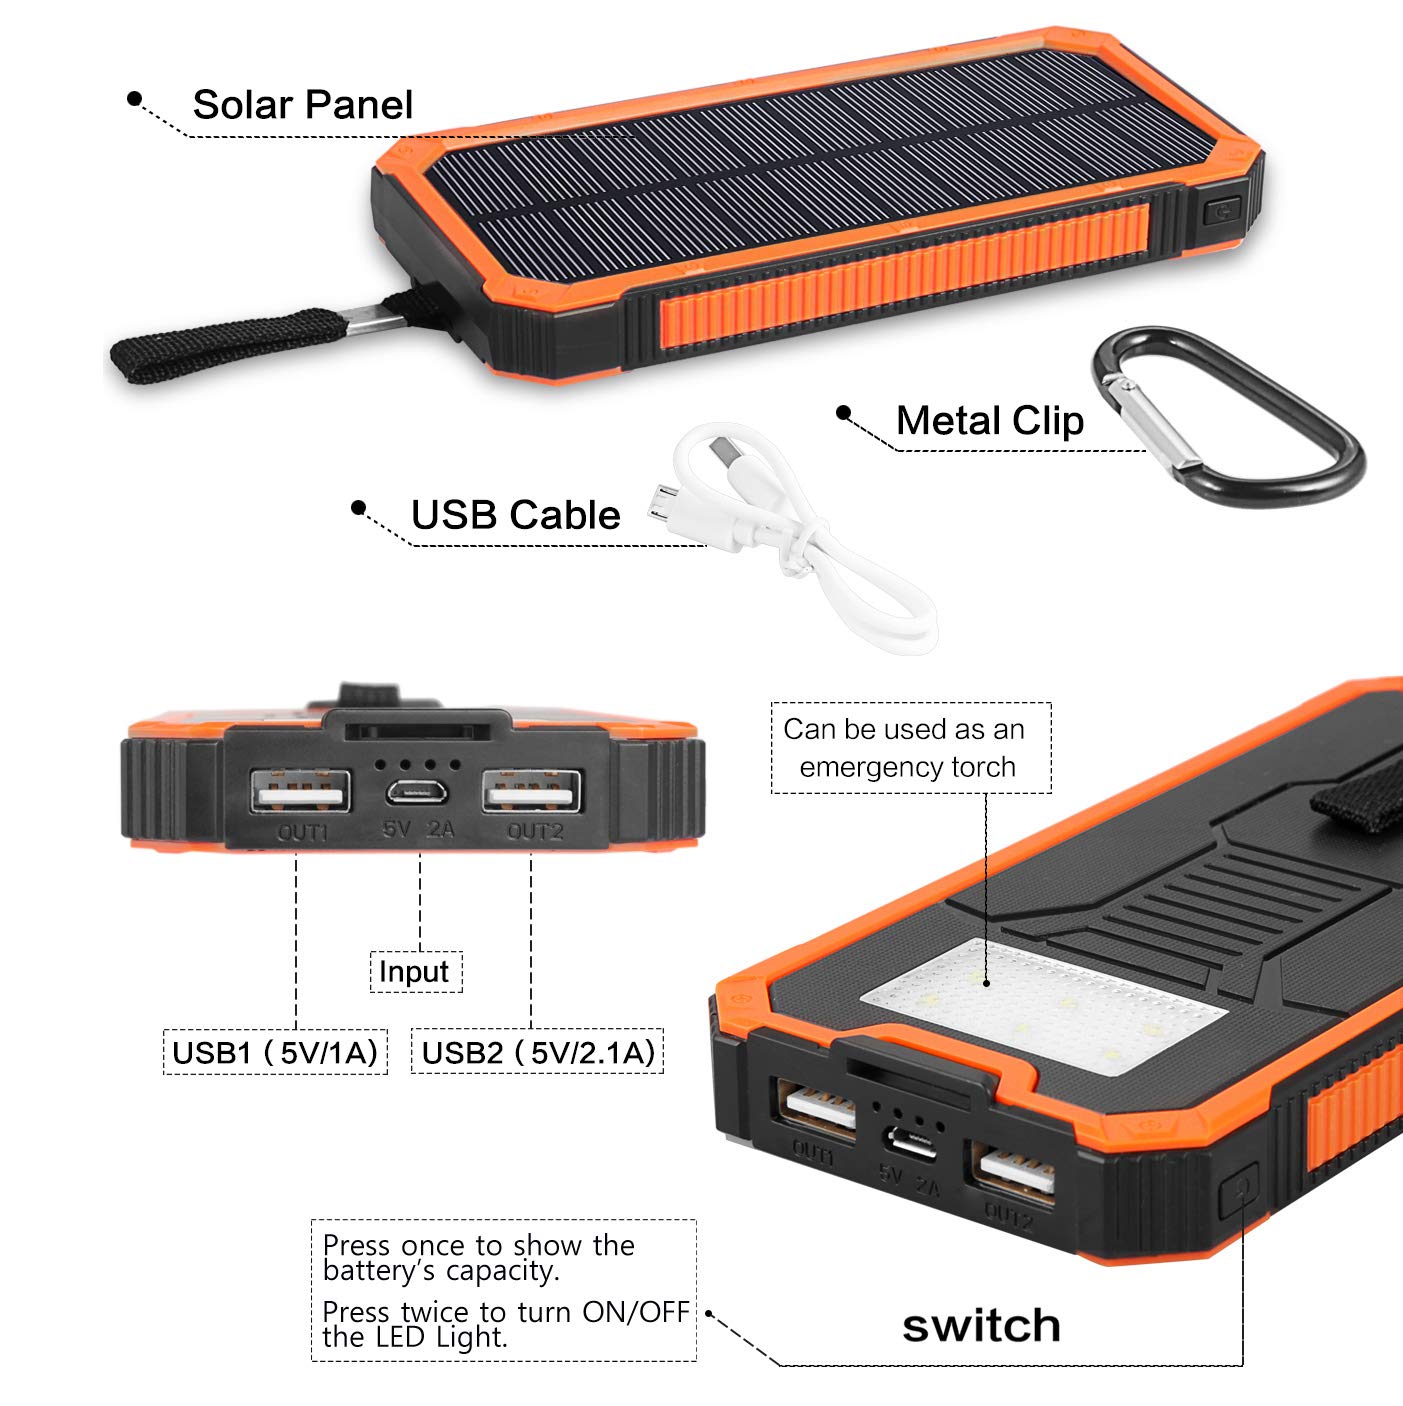 Solar Charger Power Bank, 15,000mAh External Battery Pack with Dual USB Ports and 6 LED Strong Light Flashlight，for iPhone, Smartphones, Tablets, Digital Cameras and More.